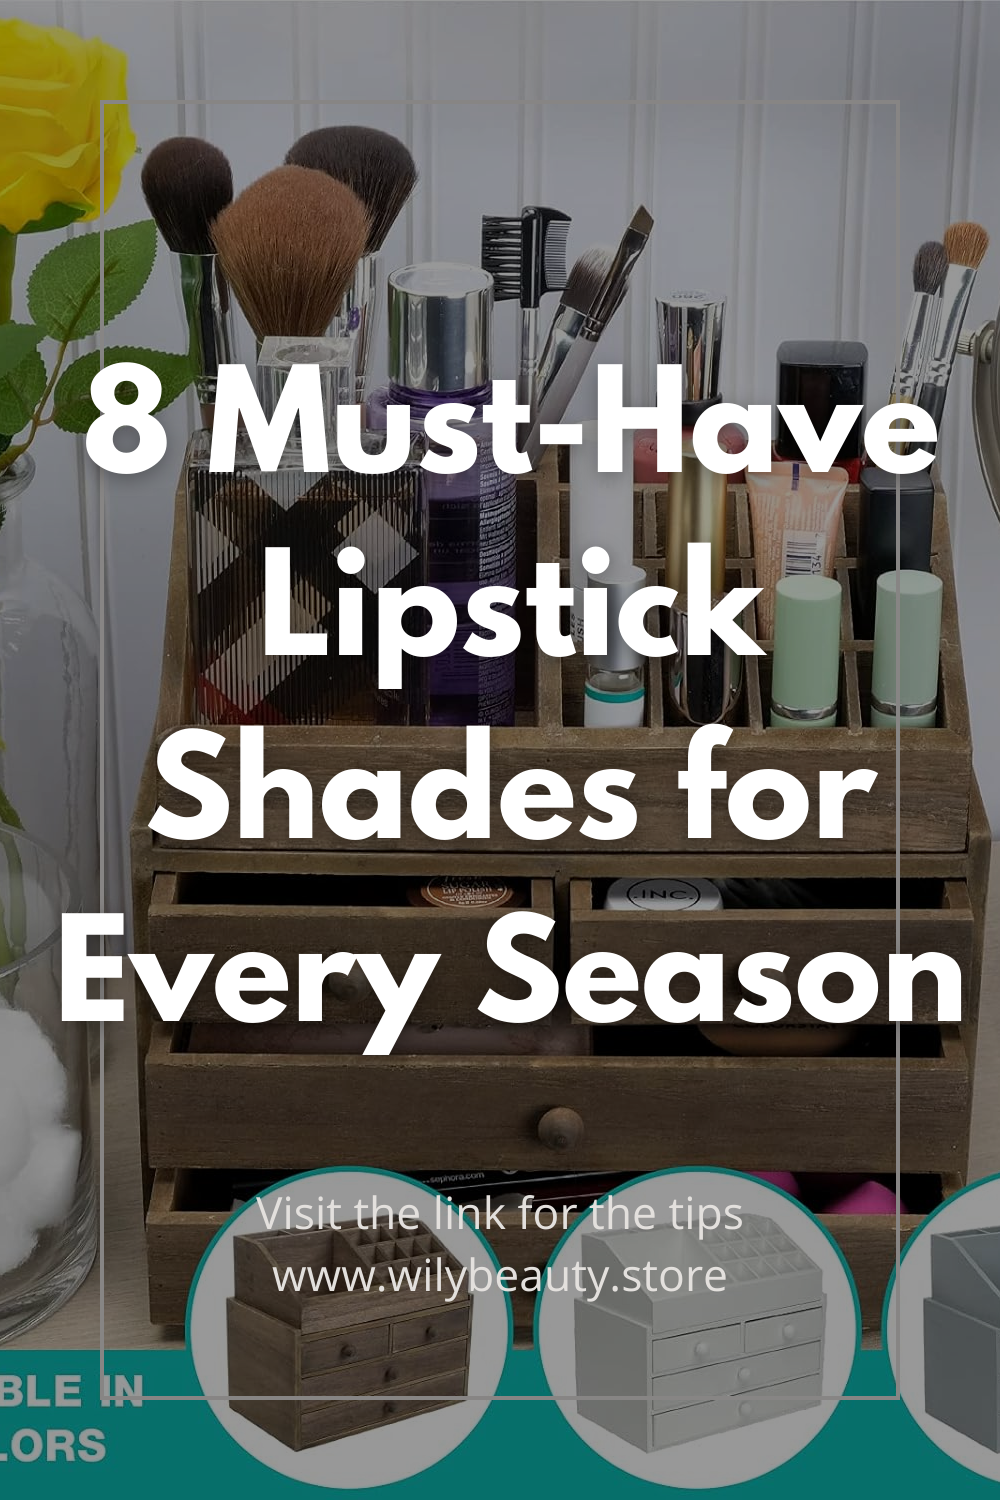 8 Must-Have Lipstick Shades for Every Season